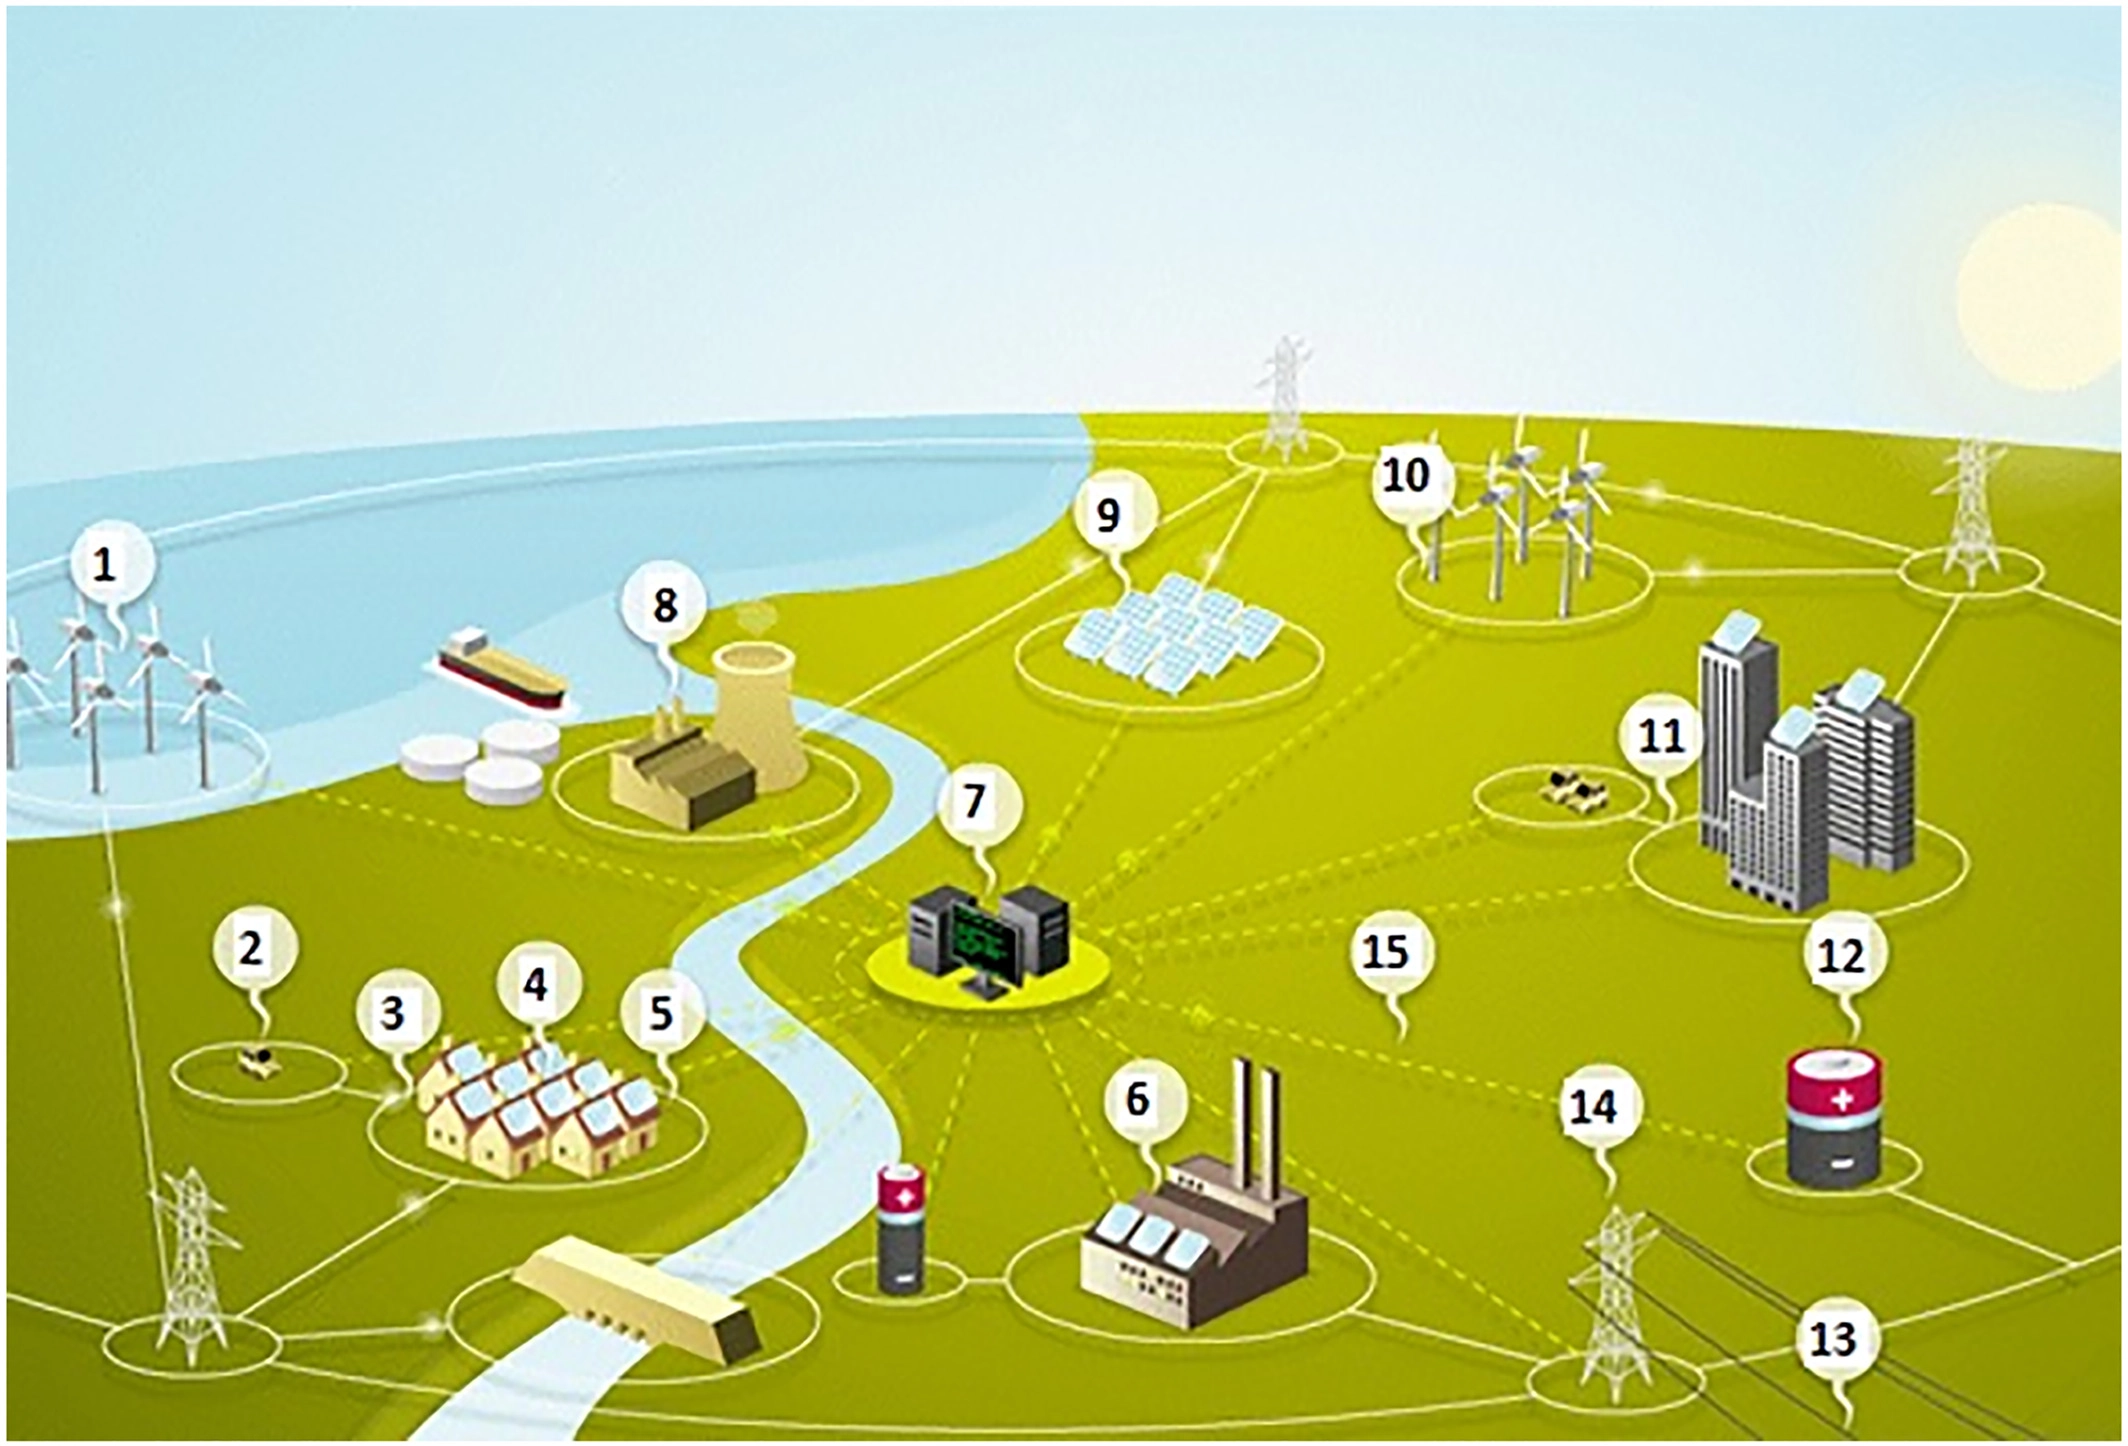 TOP 15 investment opportunities in renewable energy. invest in a greener future